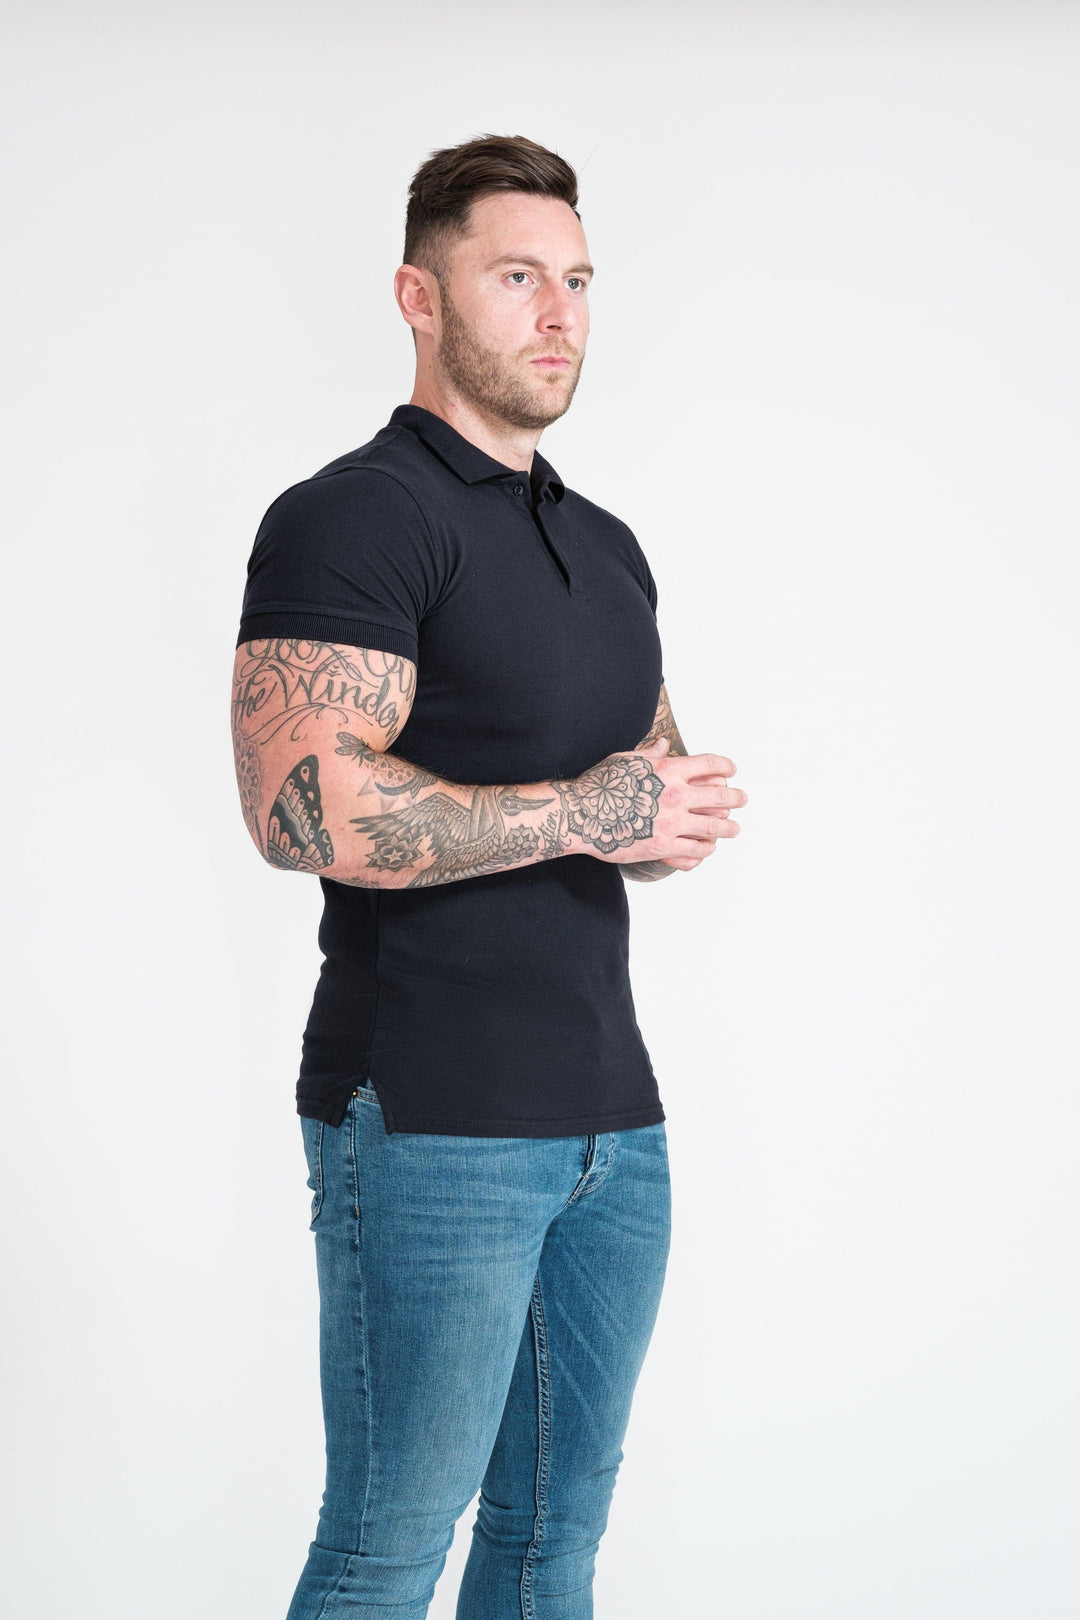 Athletic Fit Polo in Navy For Men. A Proportionally Fitted and Athletic Fit Polo. Ideal for muscular guys.